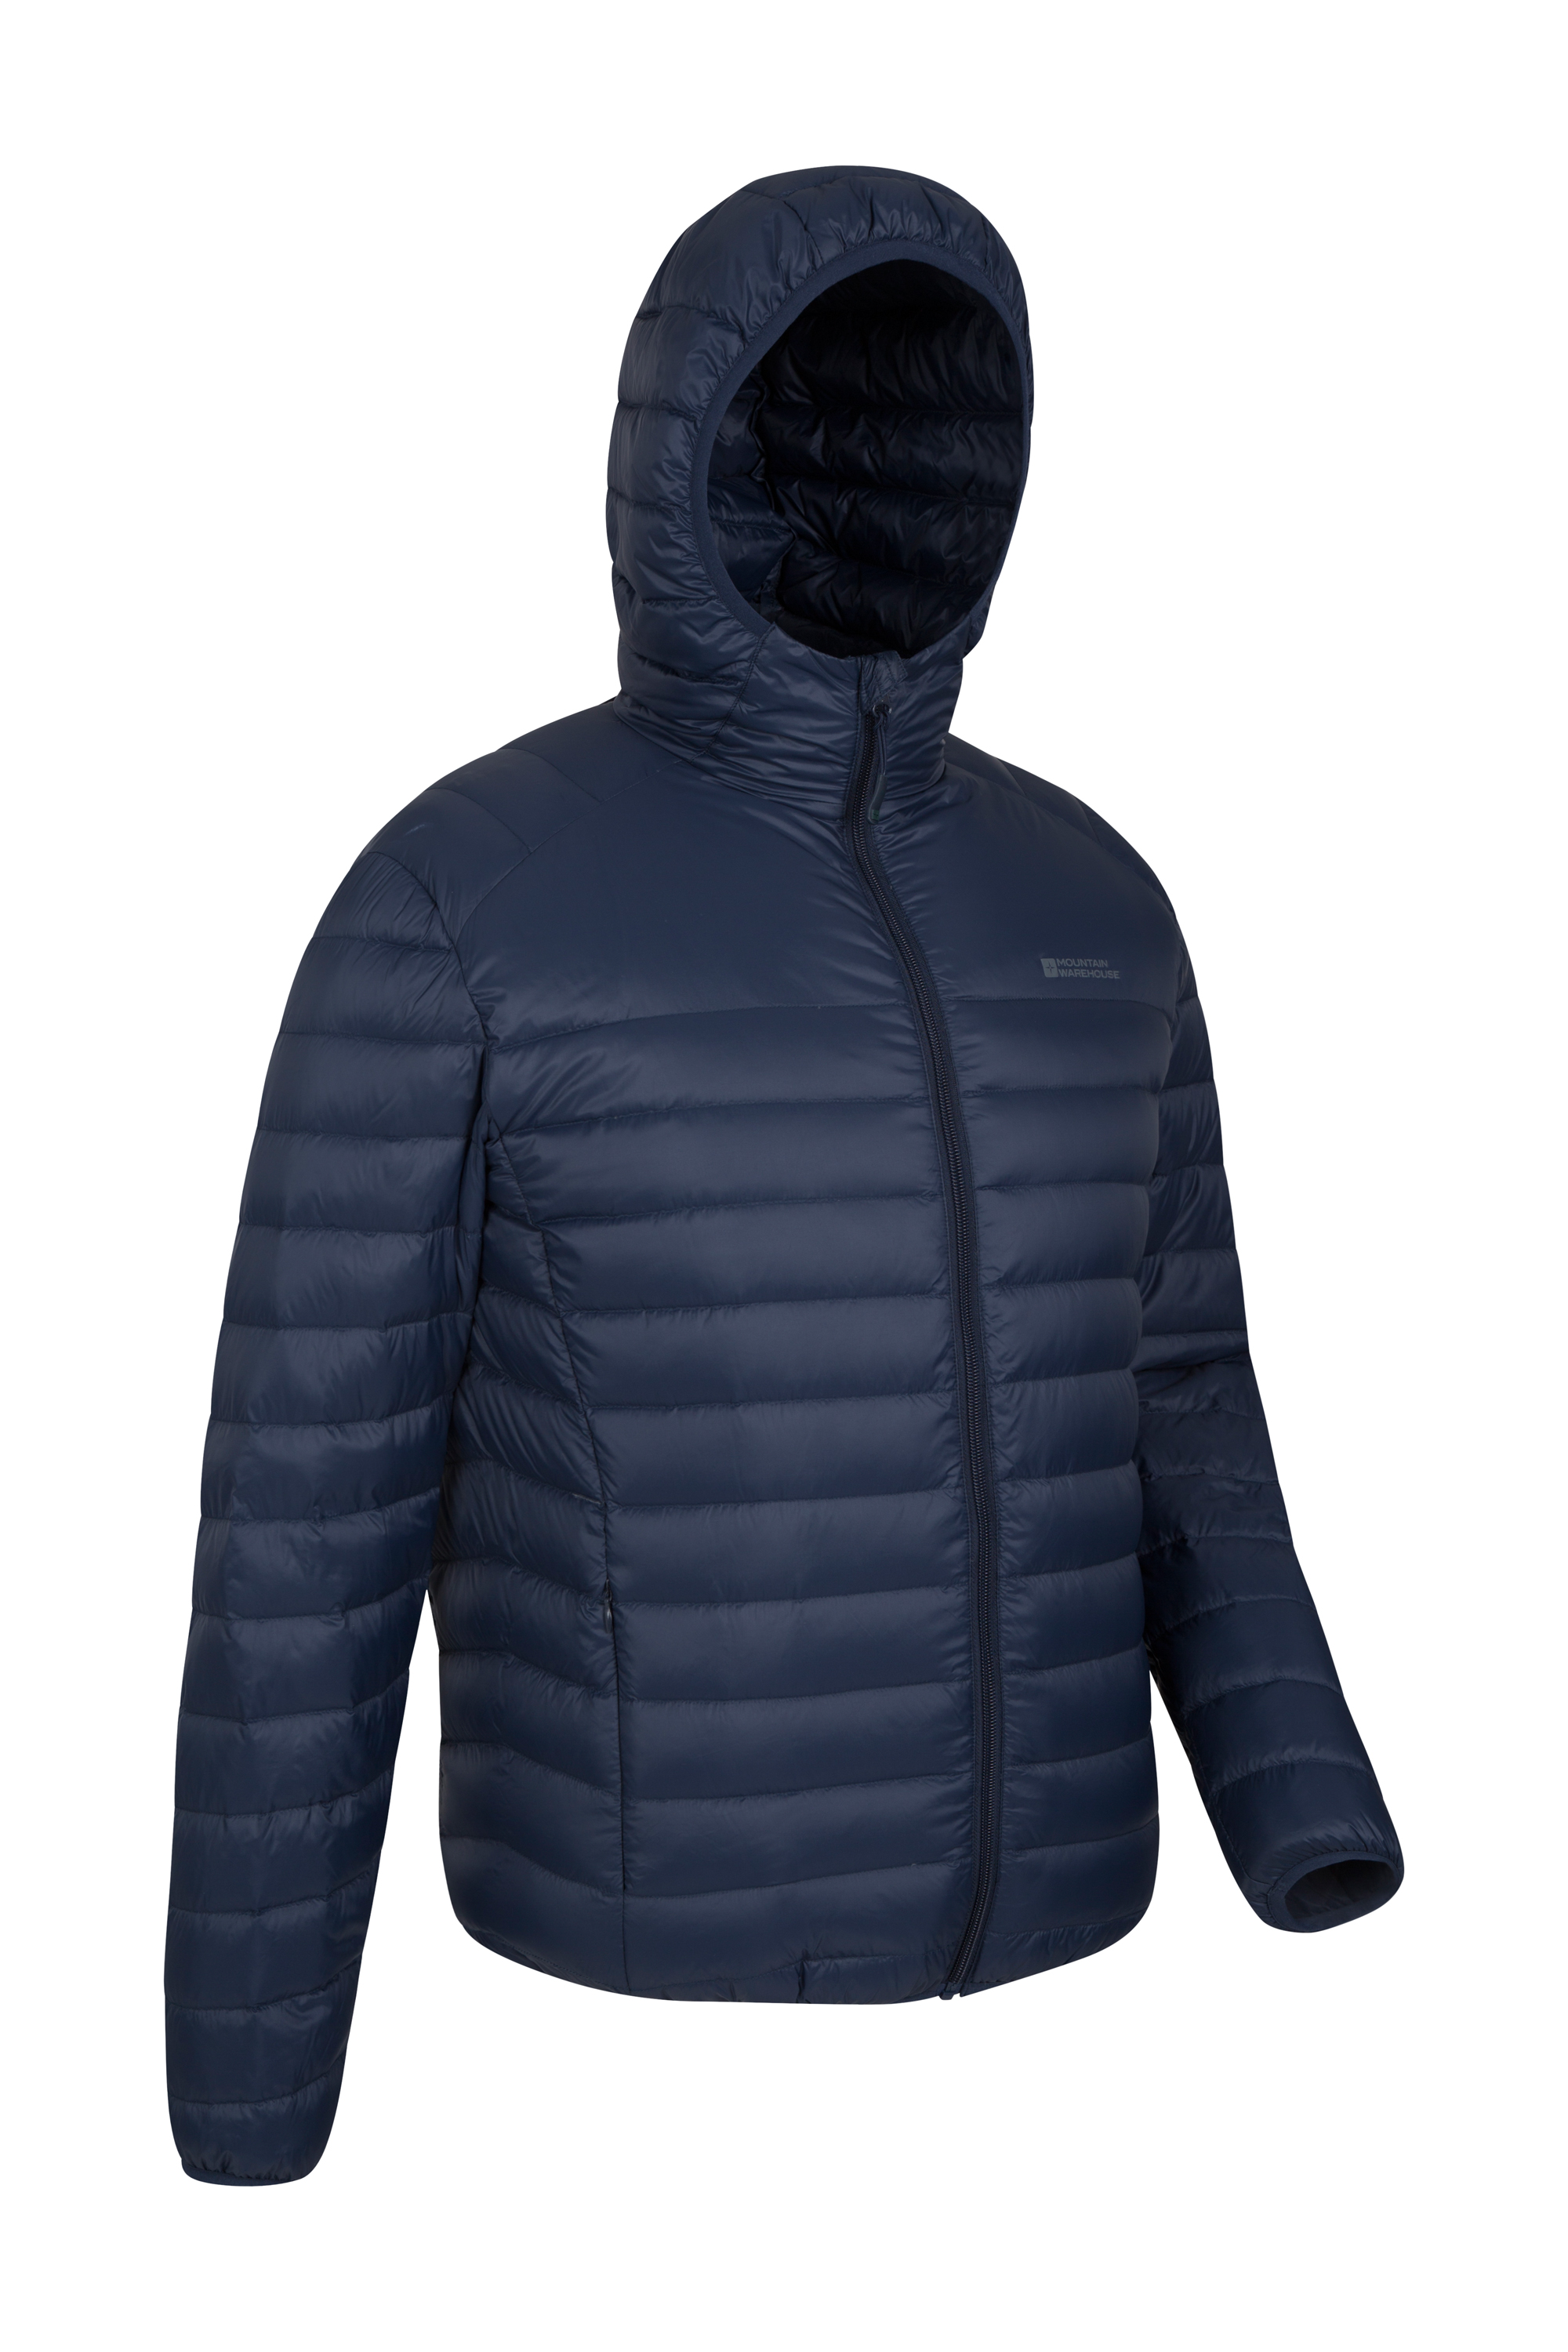 bubble coats featherweight mens hooded down jacket | mountain warehouse us OBNCNFR